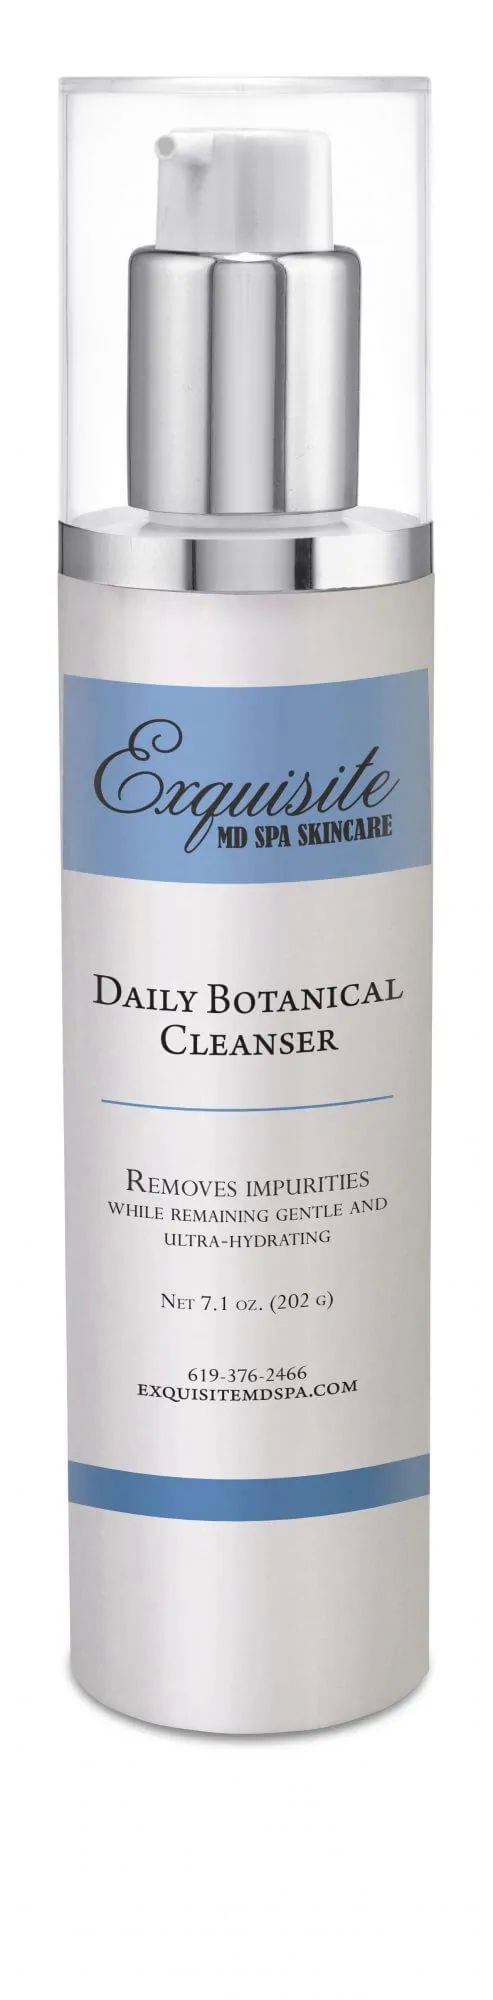 Daily Botanical Cleanser